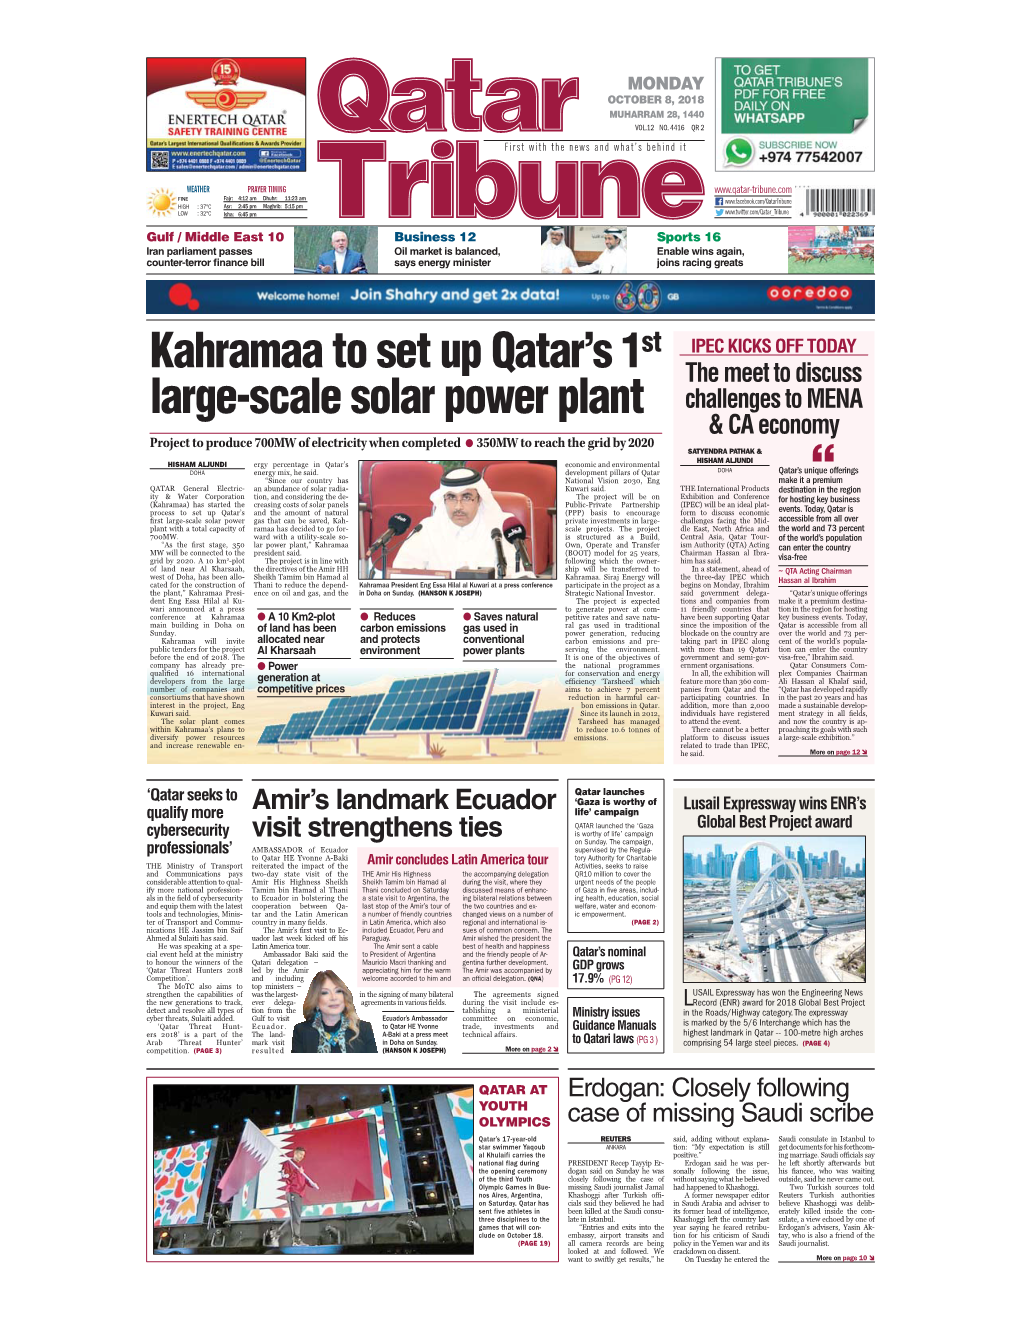 Kahramaa to Set up Qatar's 1St Large-Scale Solar Power Plant